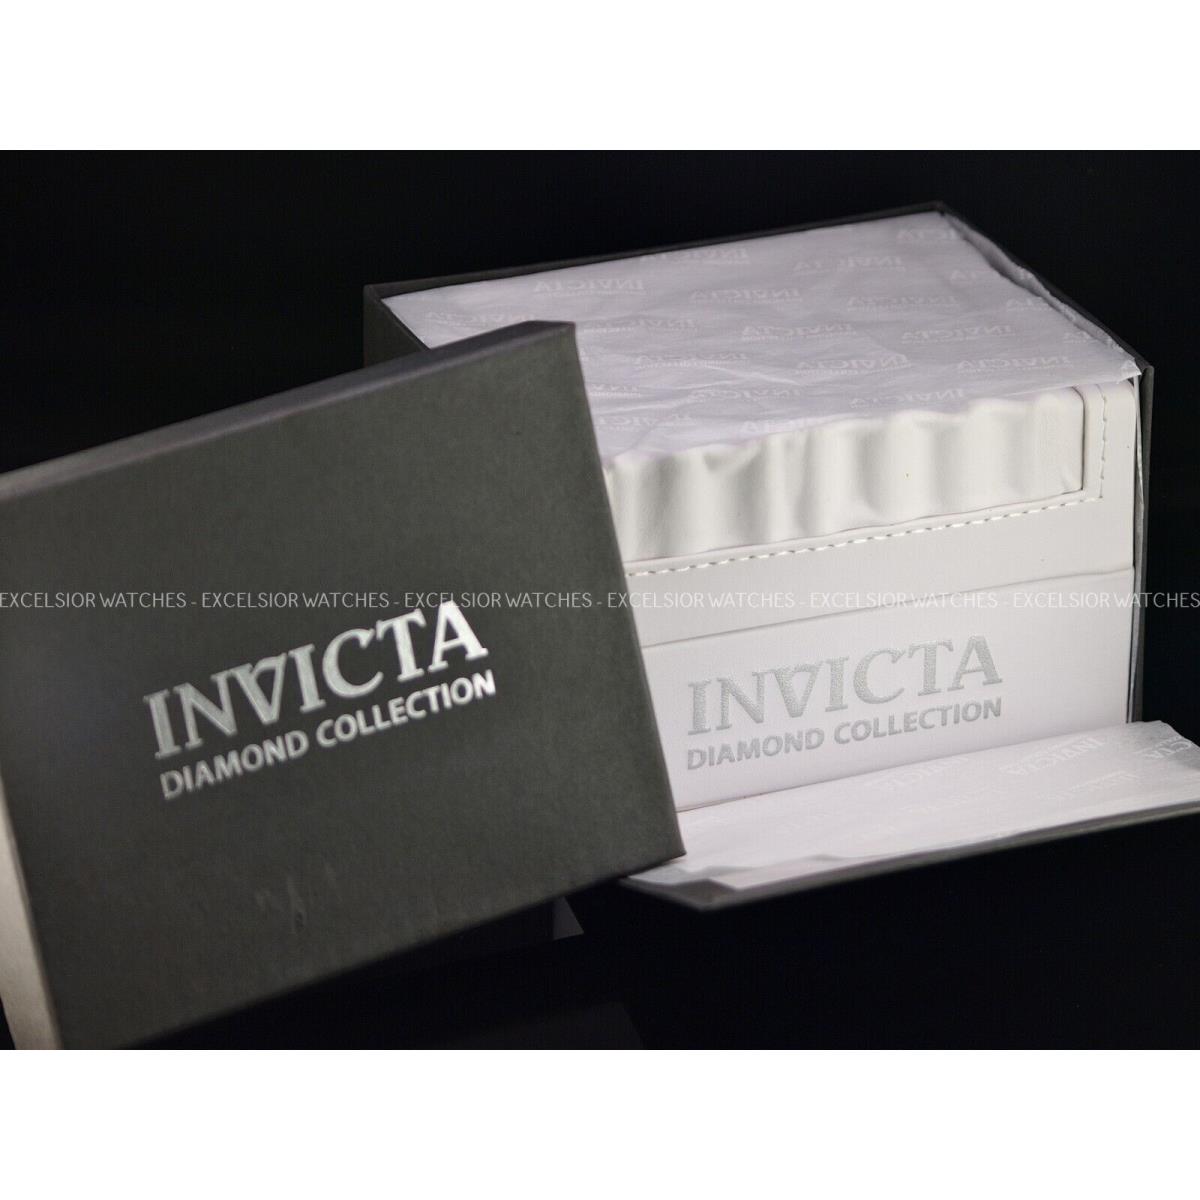 Lot OF 40 Invicta One Slot Limited Edition Diamond Collection White Watch Box